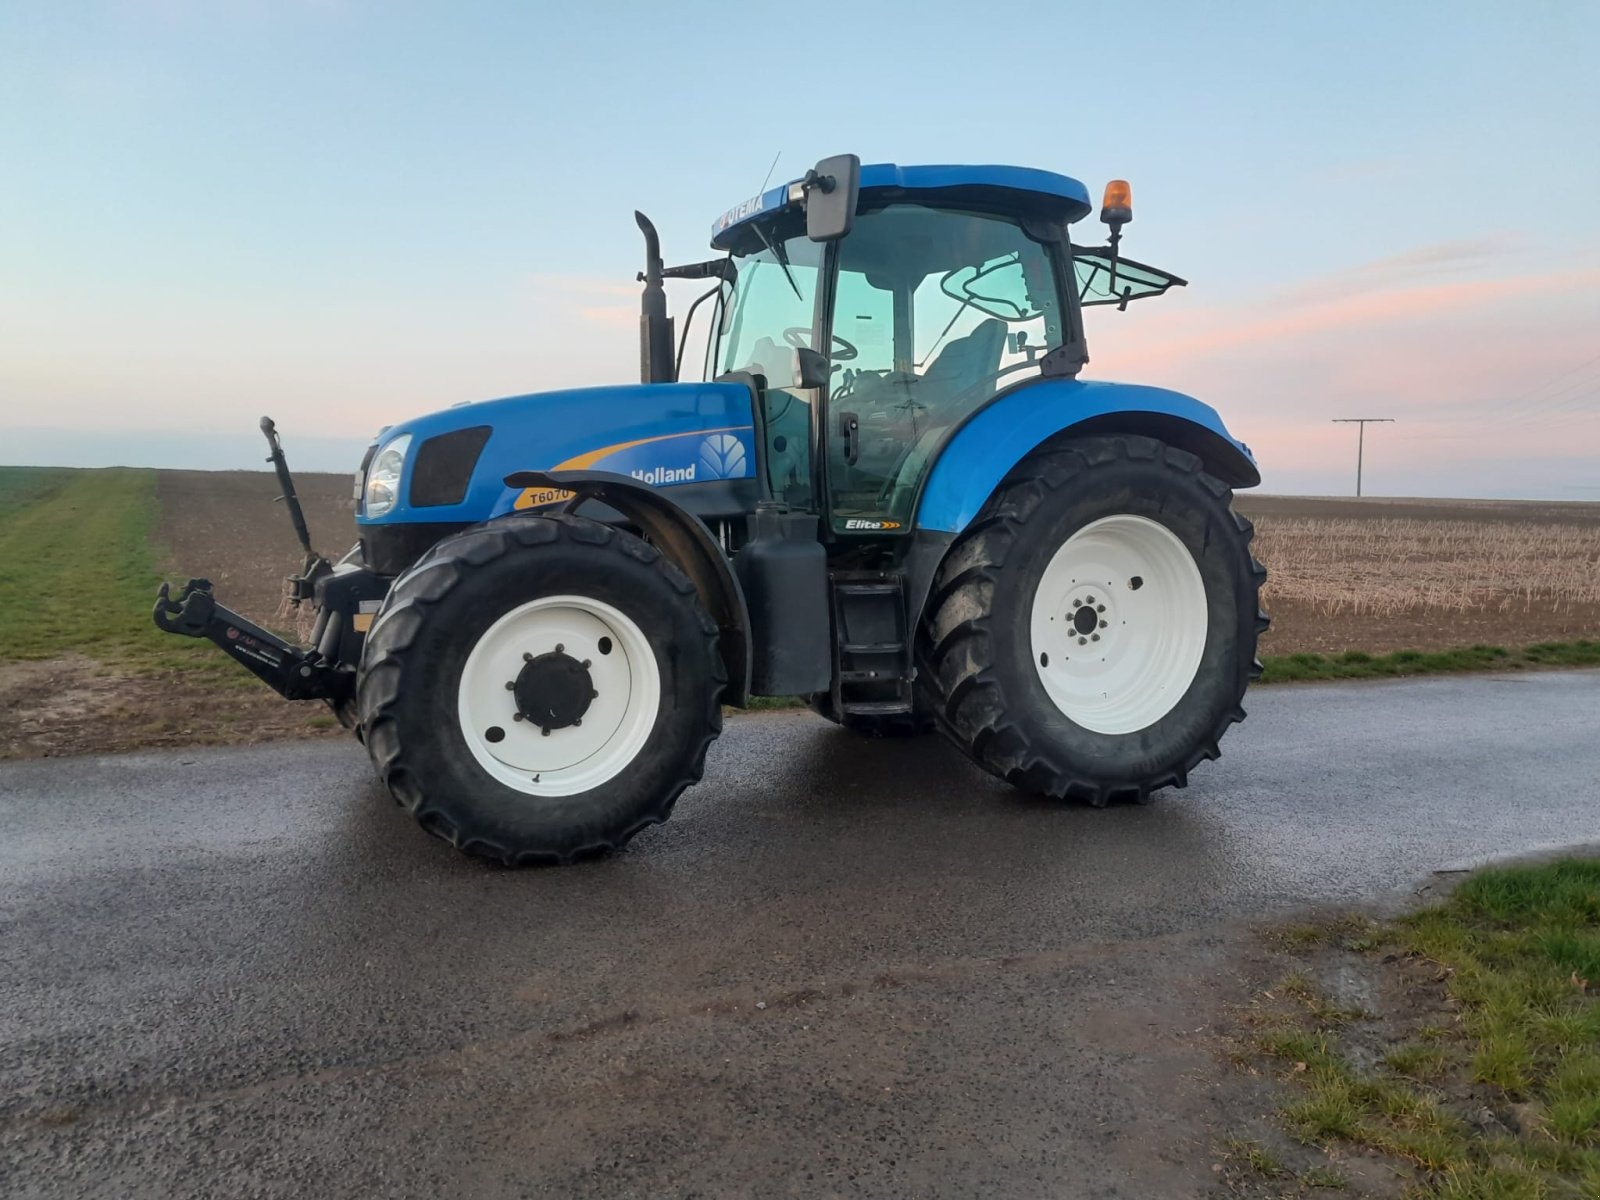 New Holland T 6070 Elite tractor €50,000